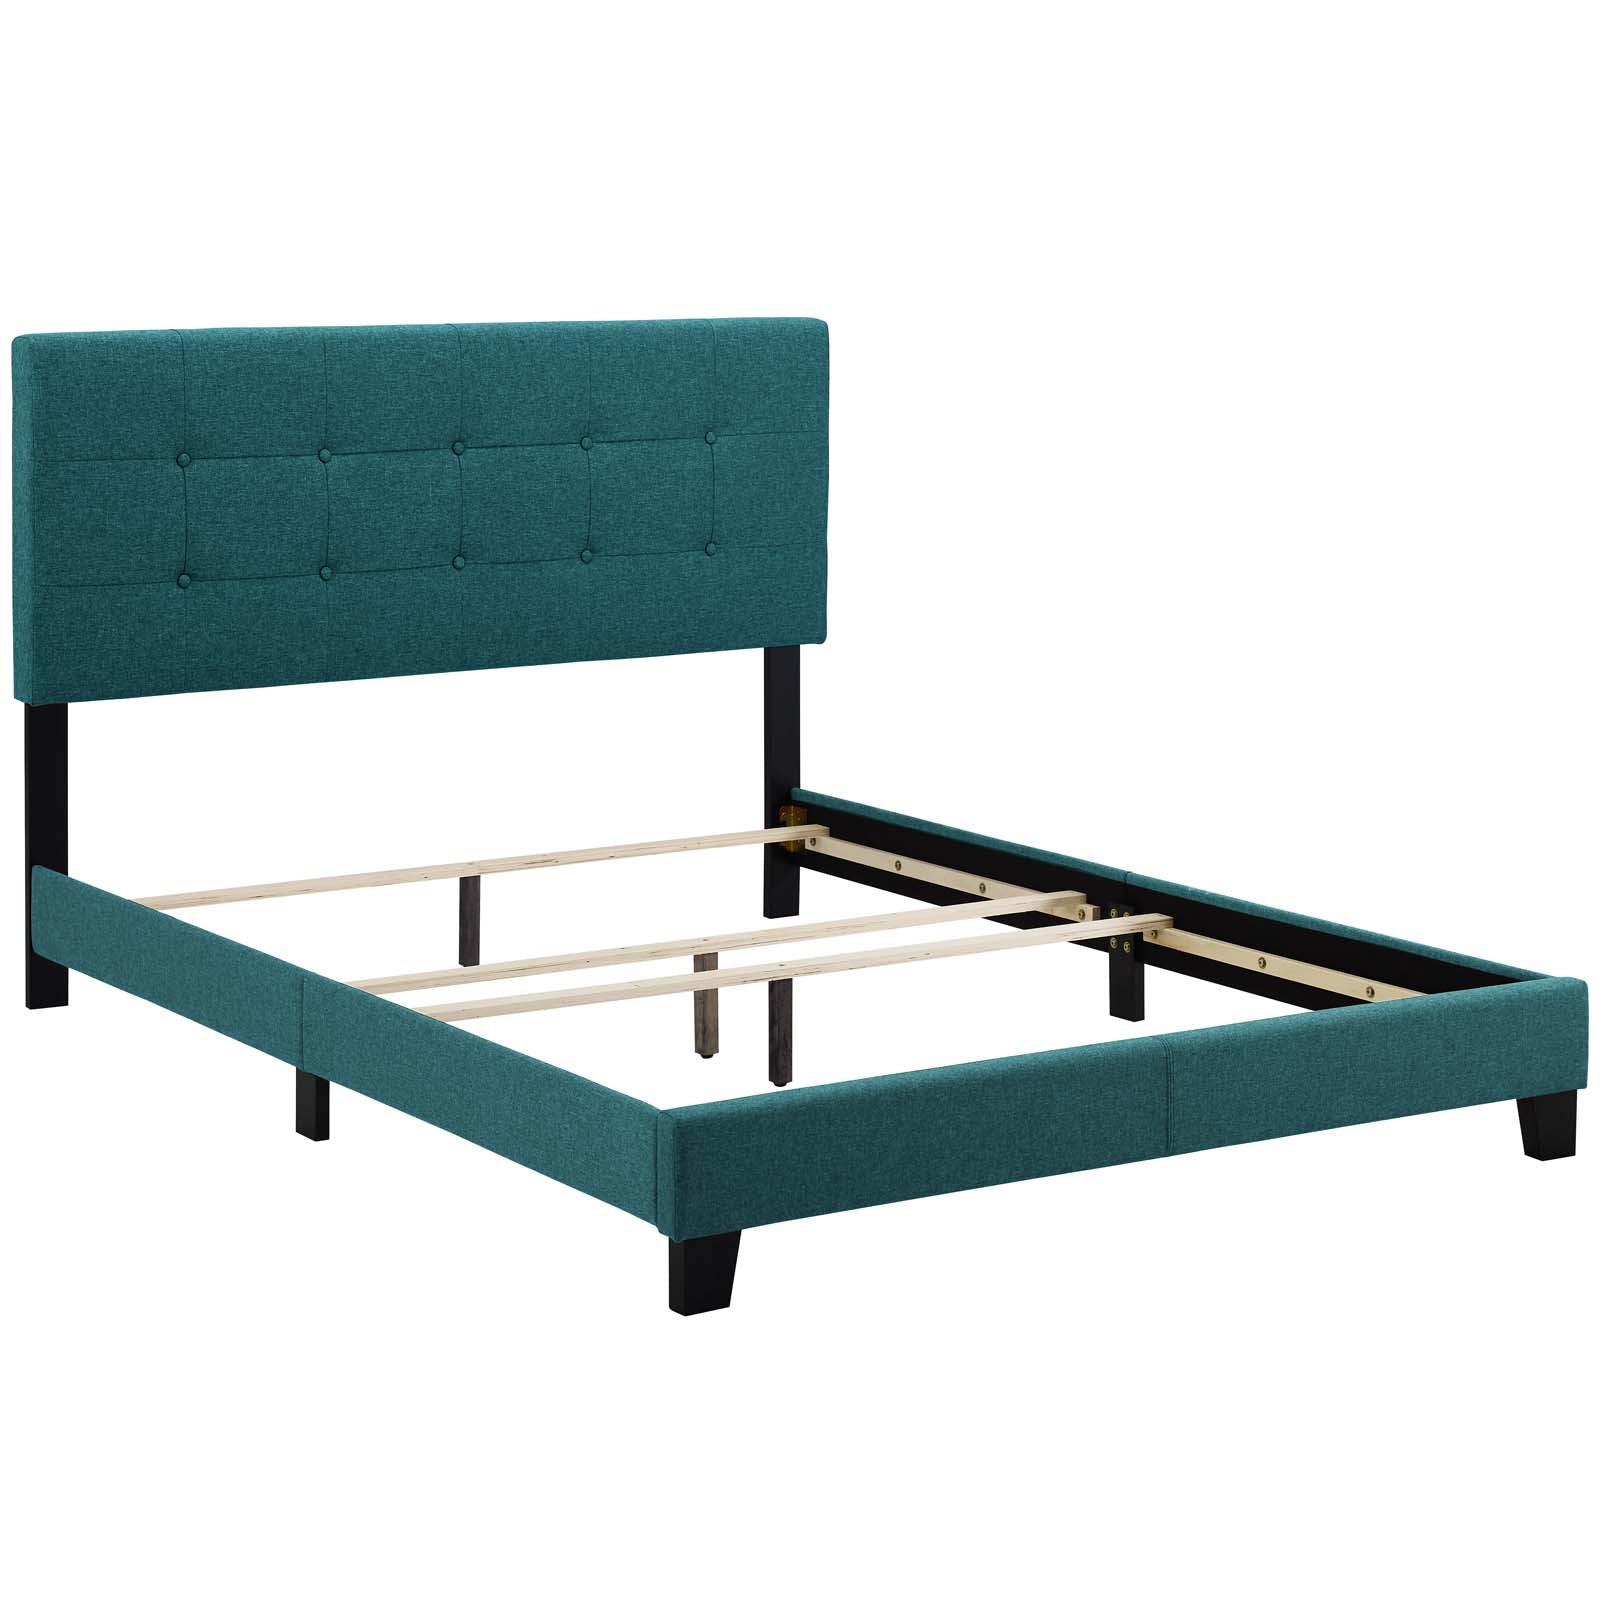 Modway Beds - Amira Twin Upholstered Fabric Bed Teal